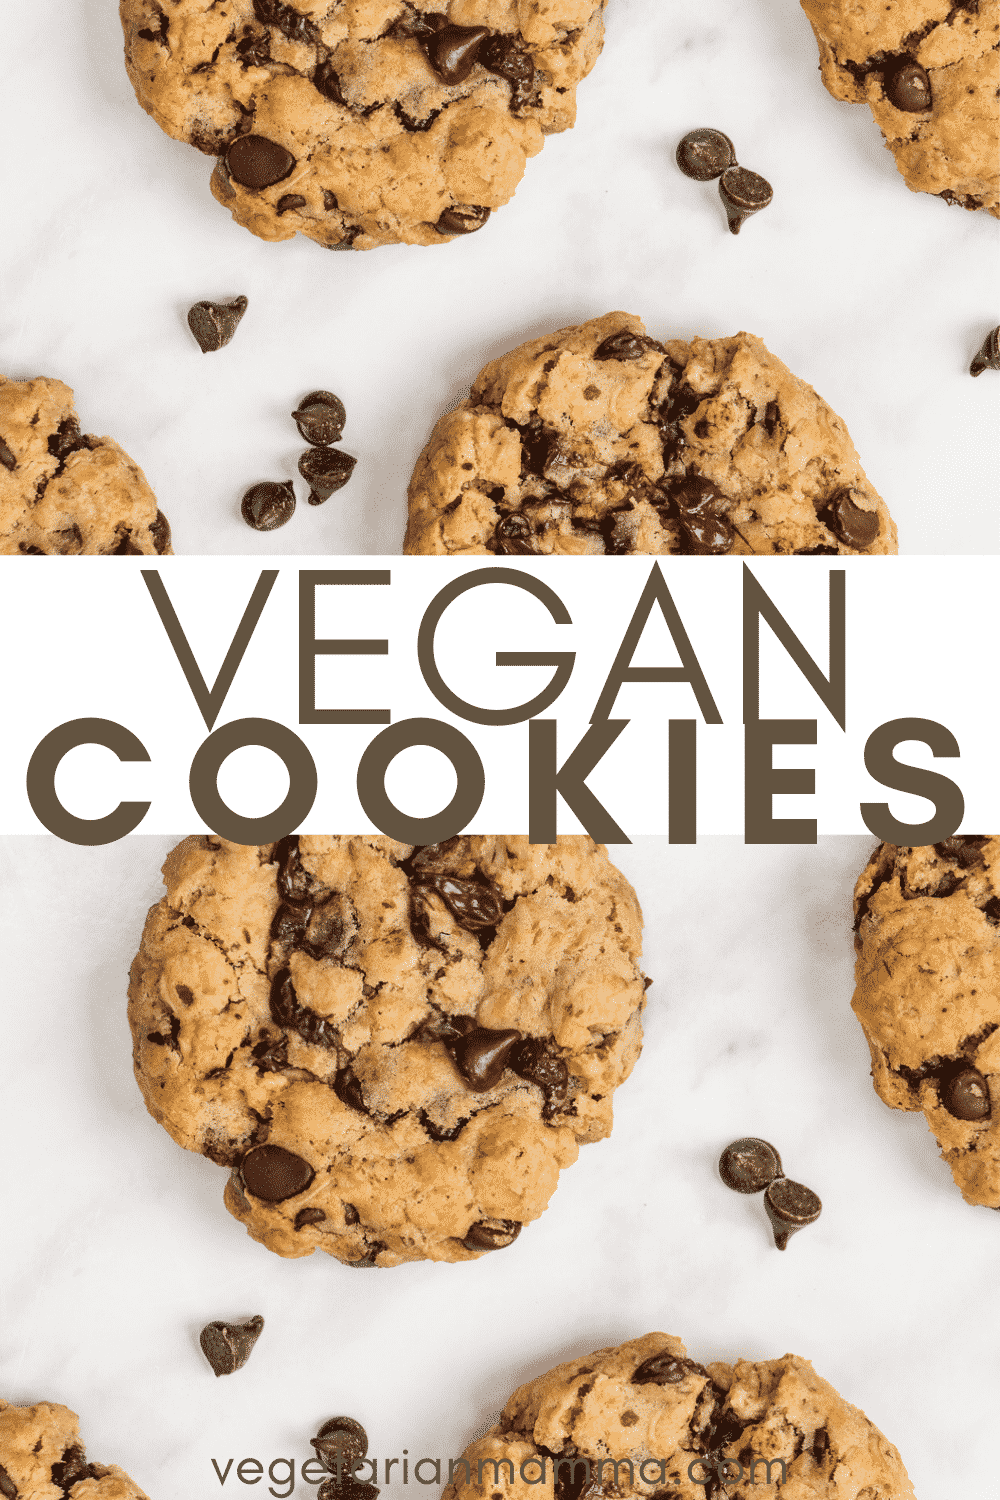 Vegan Oatmeal Chocolate Chip Cookies are chewy, soft, and packed with chocolate! These are truly the best gluten-free cookies. #glutenfreecookies #vegandessert